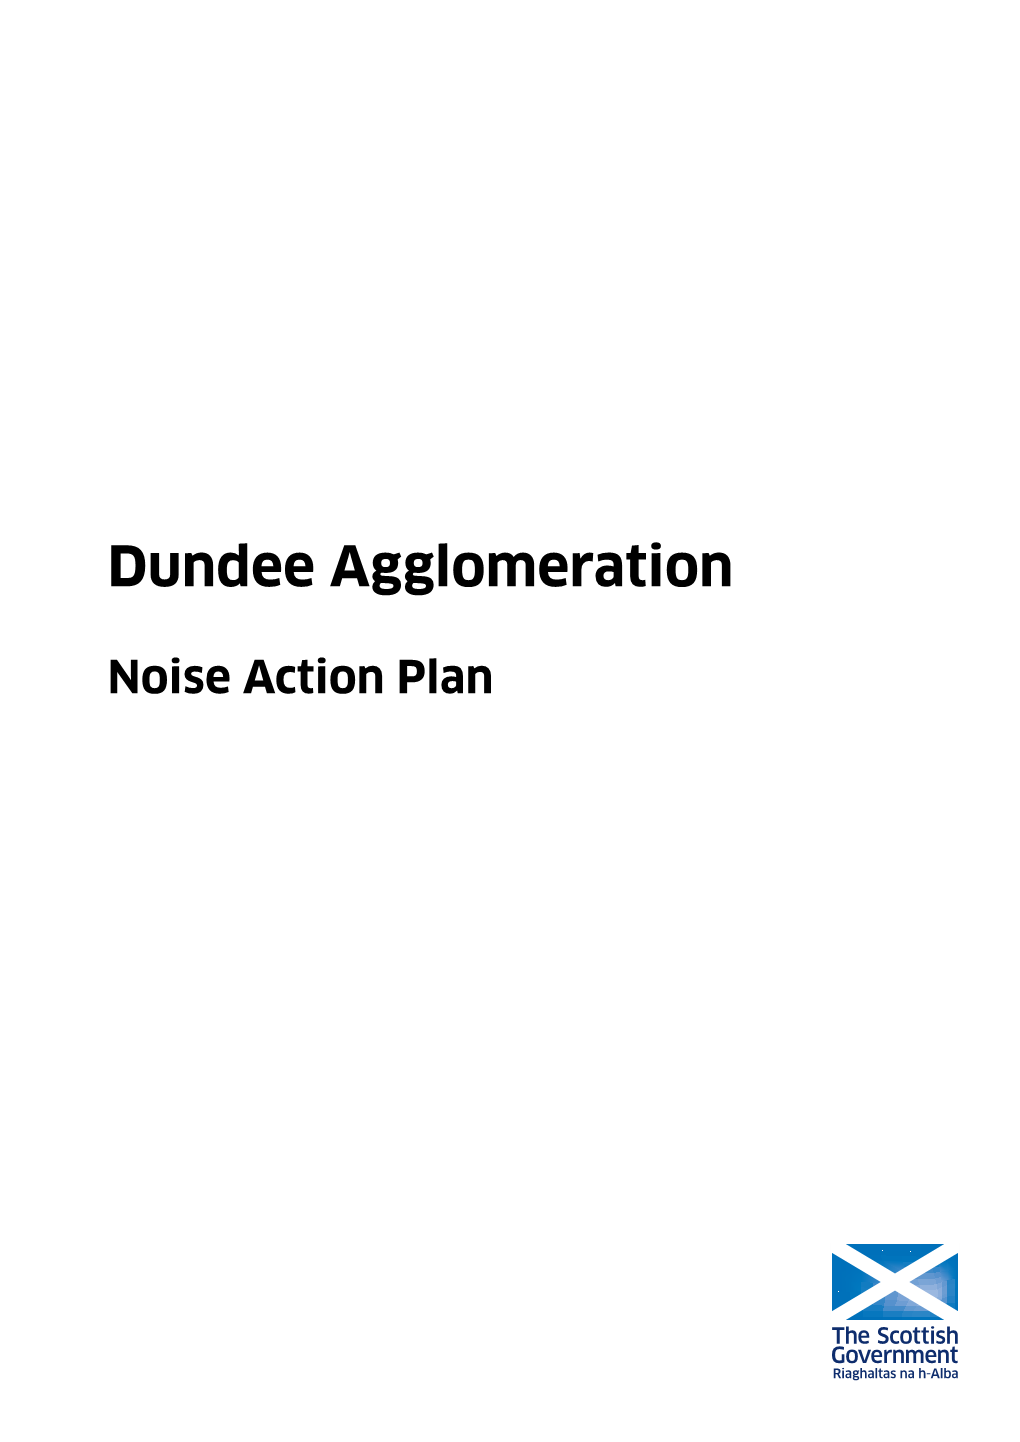 Noise Action Plan for the Dundee Agglomeration